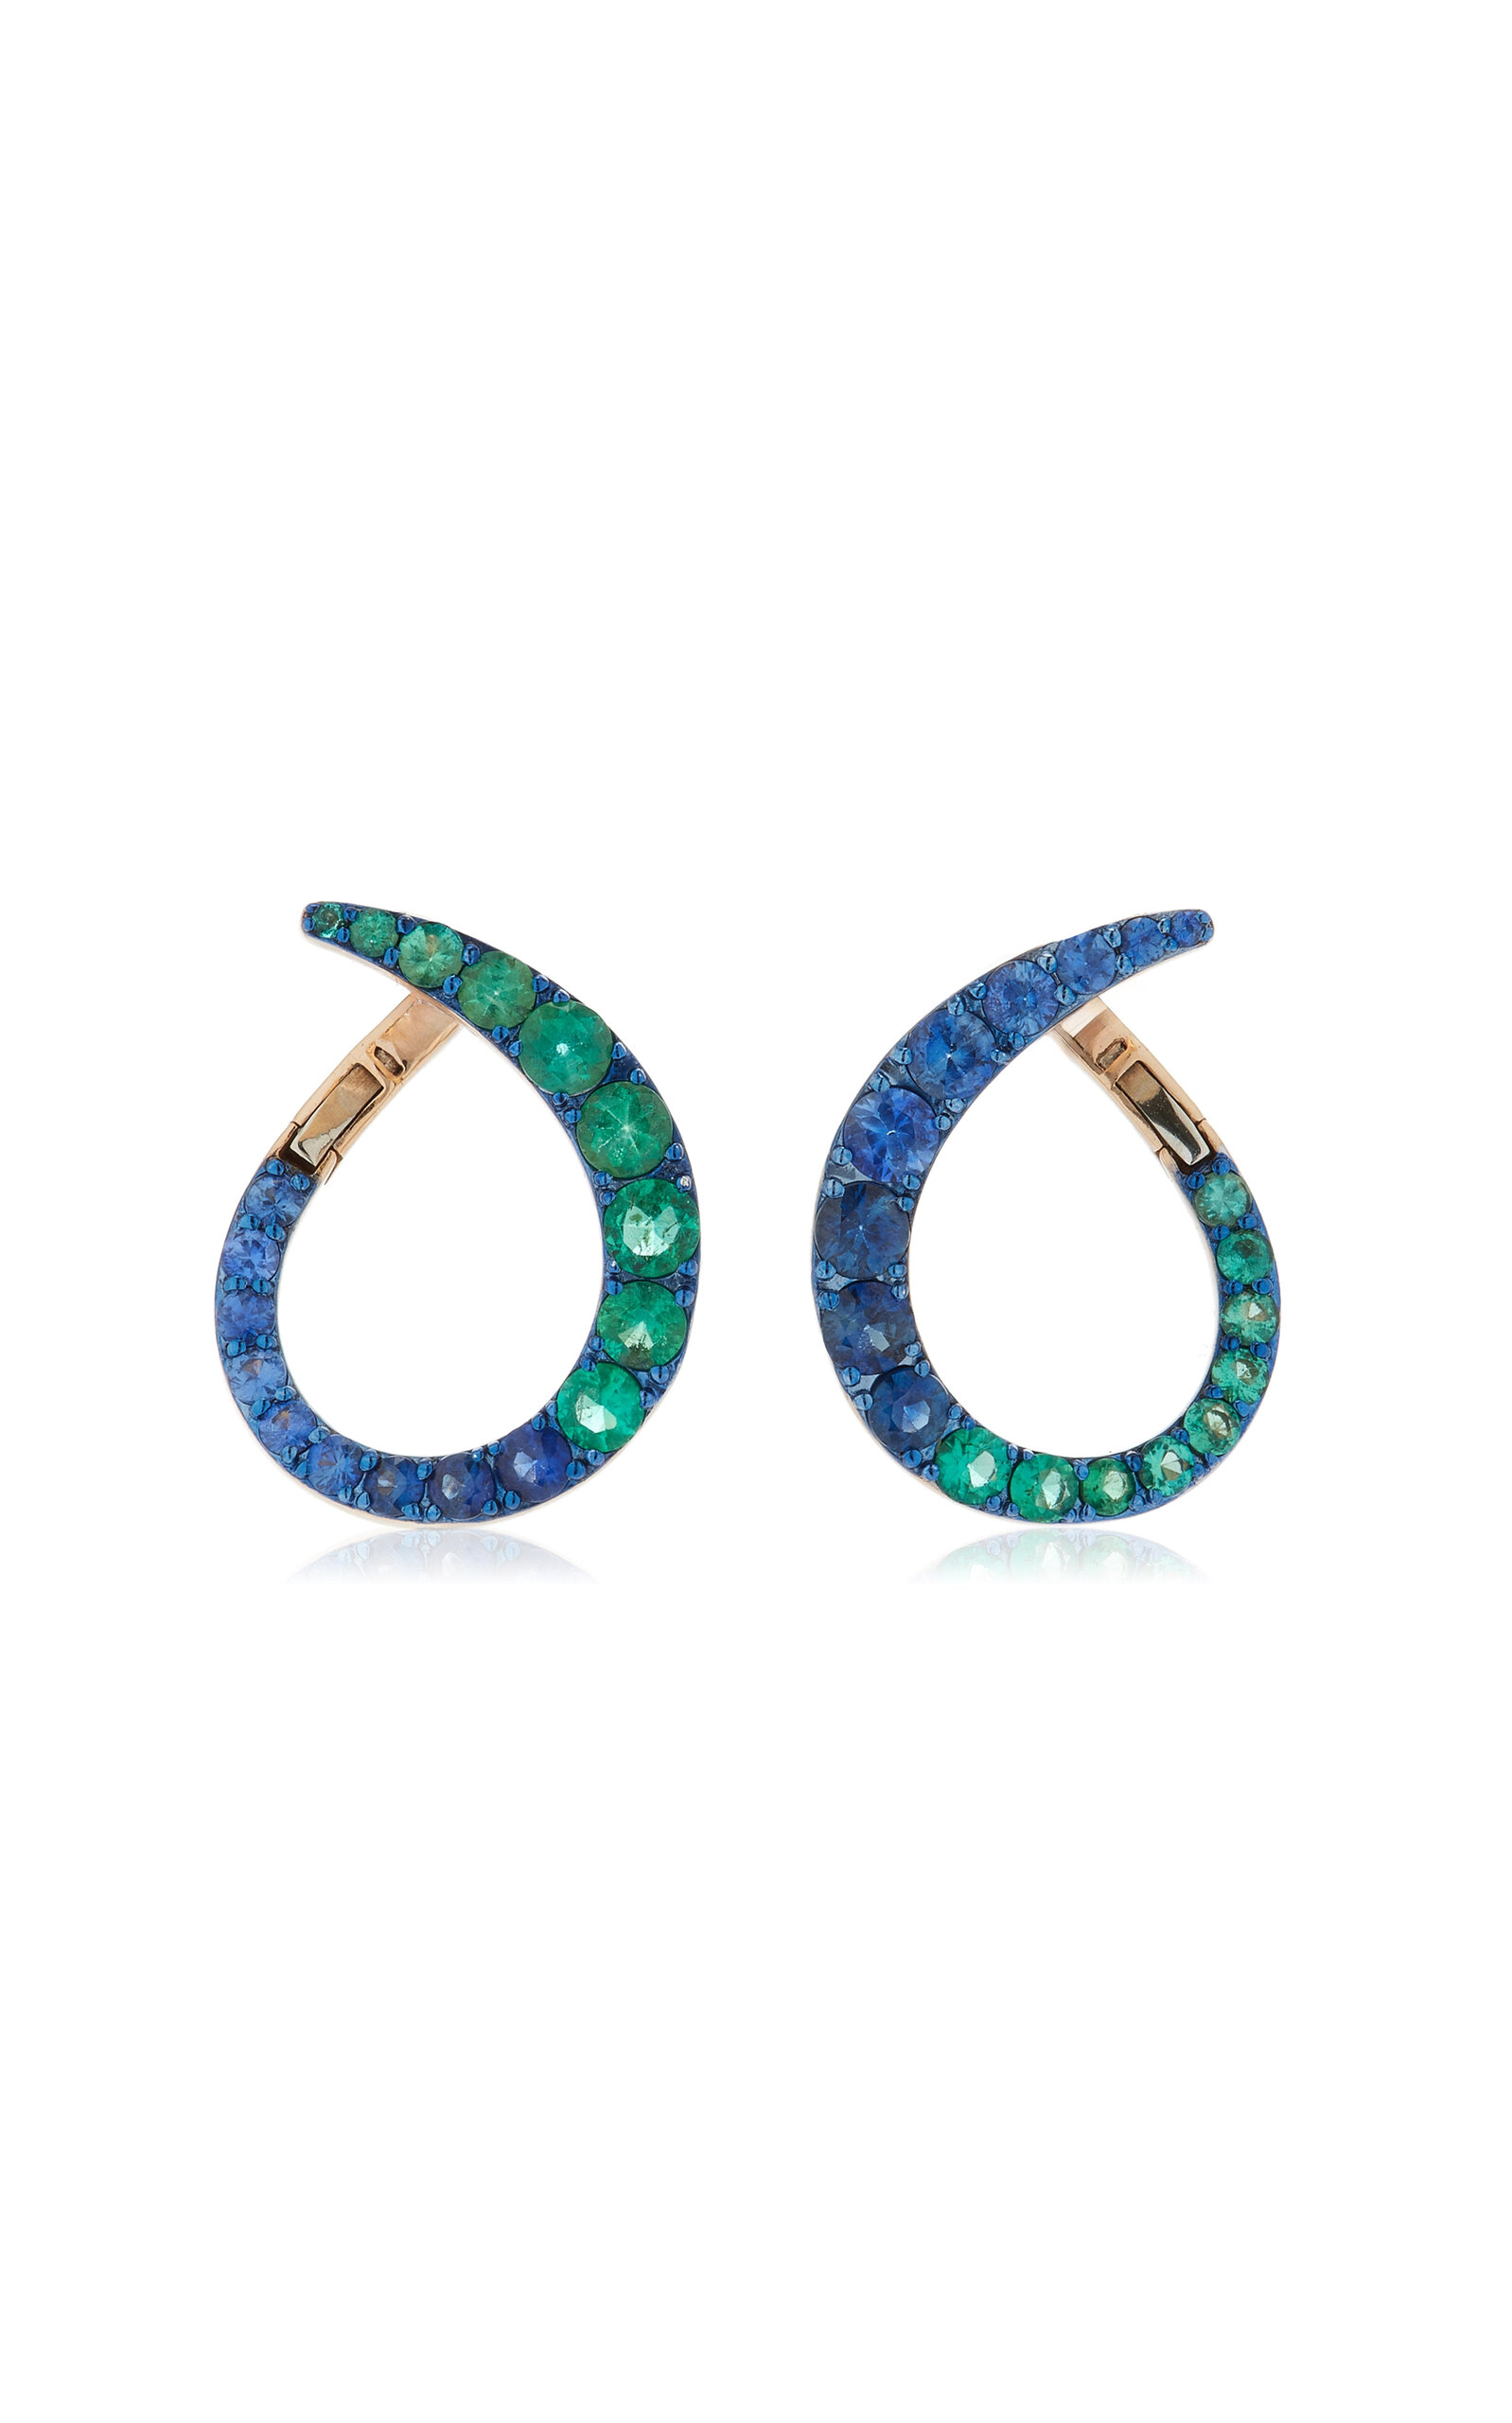 Grand Radiant 18K Rose Gold Emerald and Sapphire Hoop Earrings